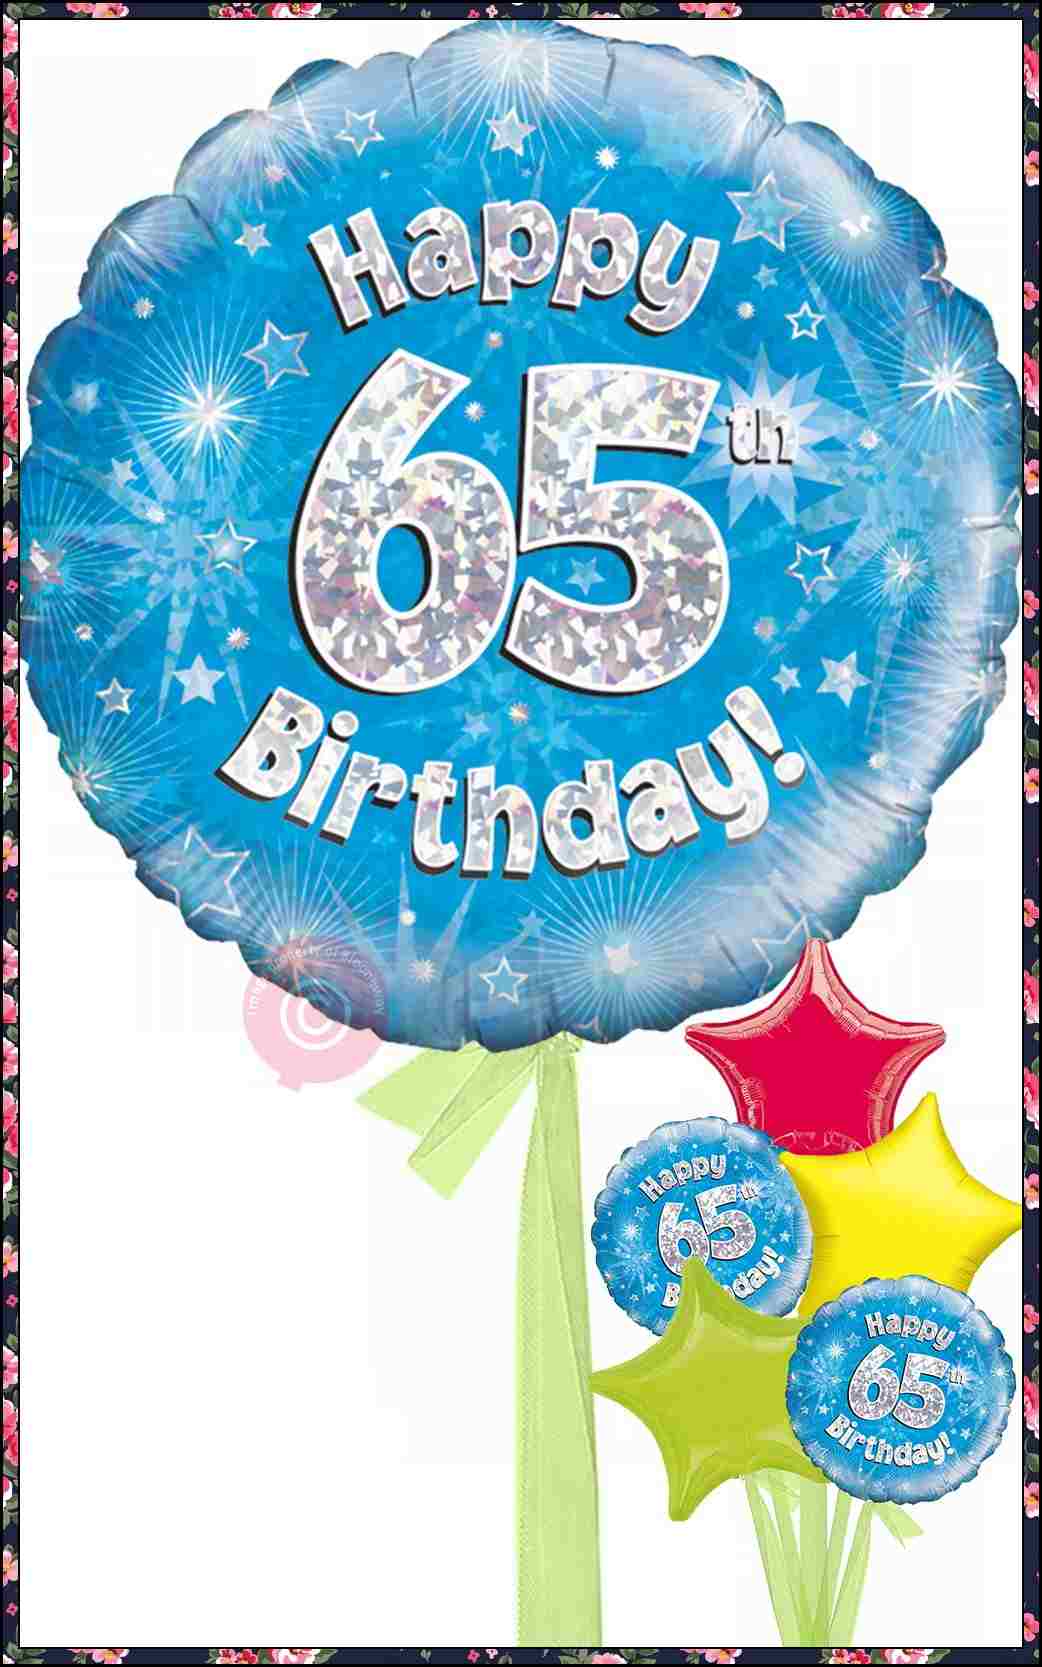 65th birthday images male
